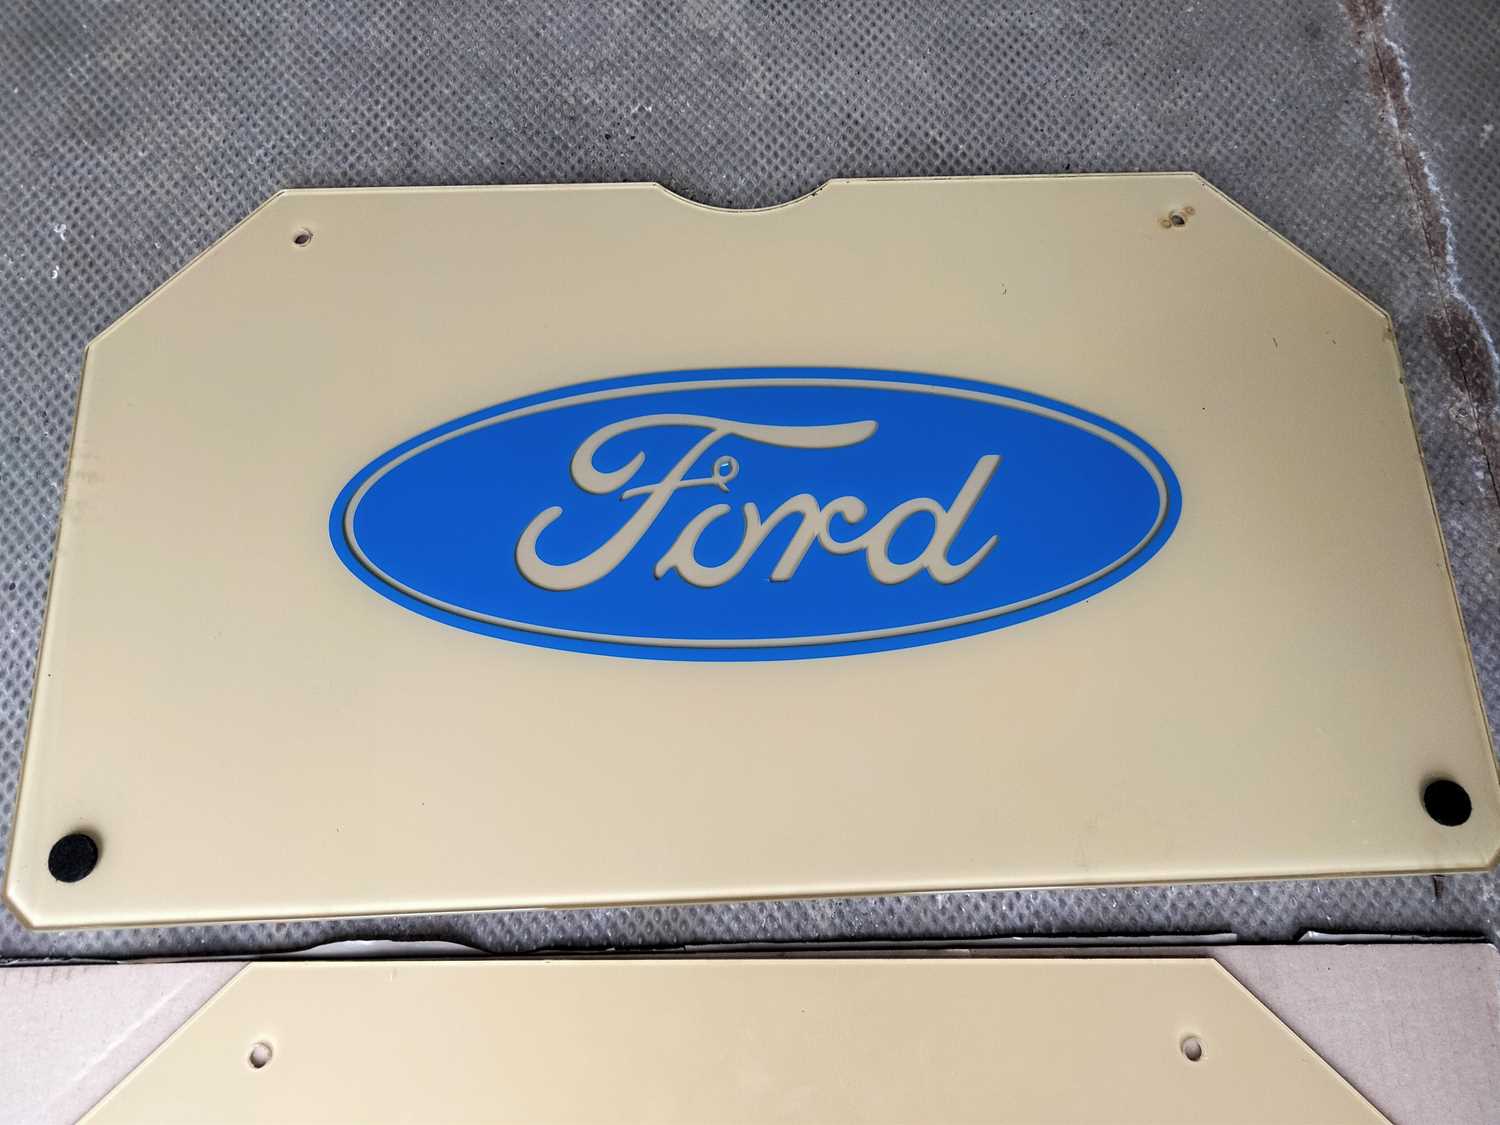 Lot 7 - FORD GLASS SIGN